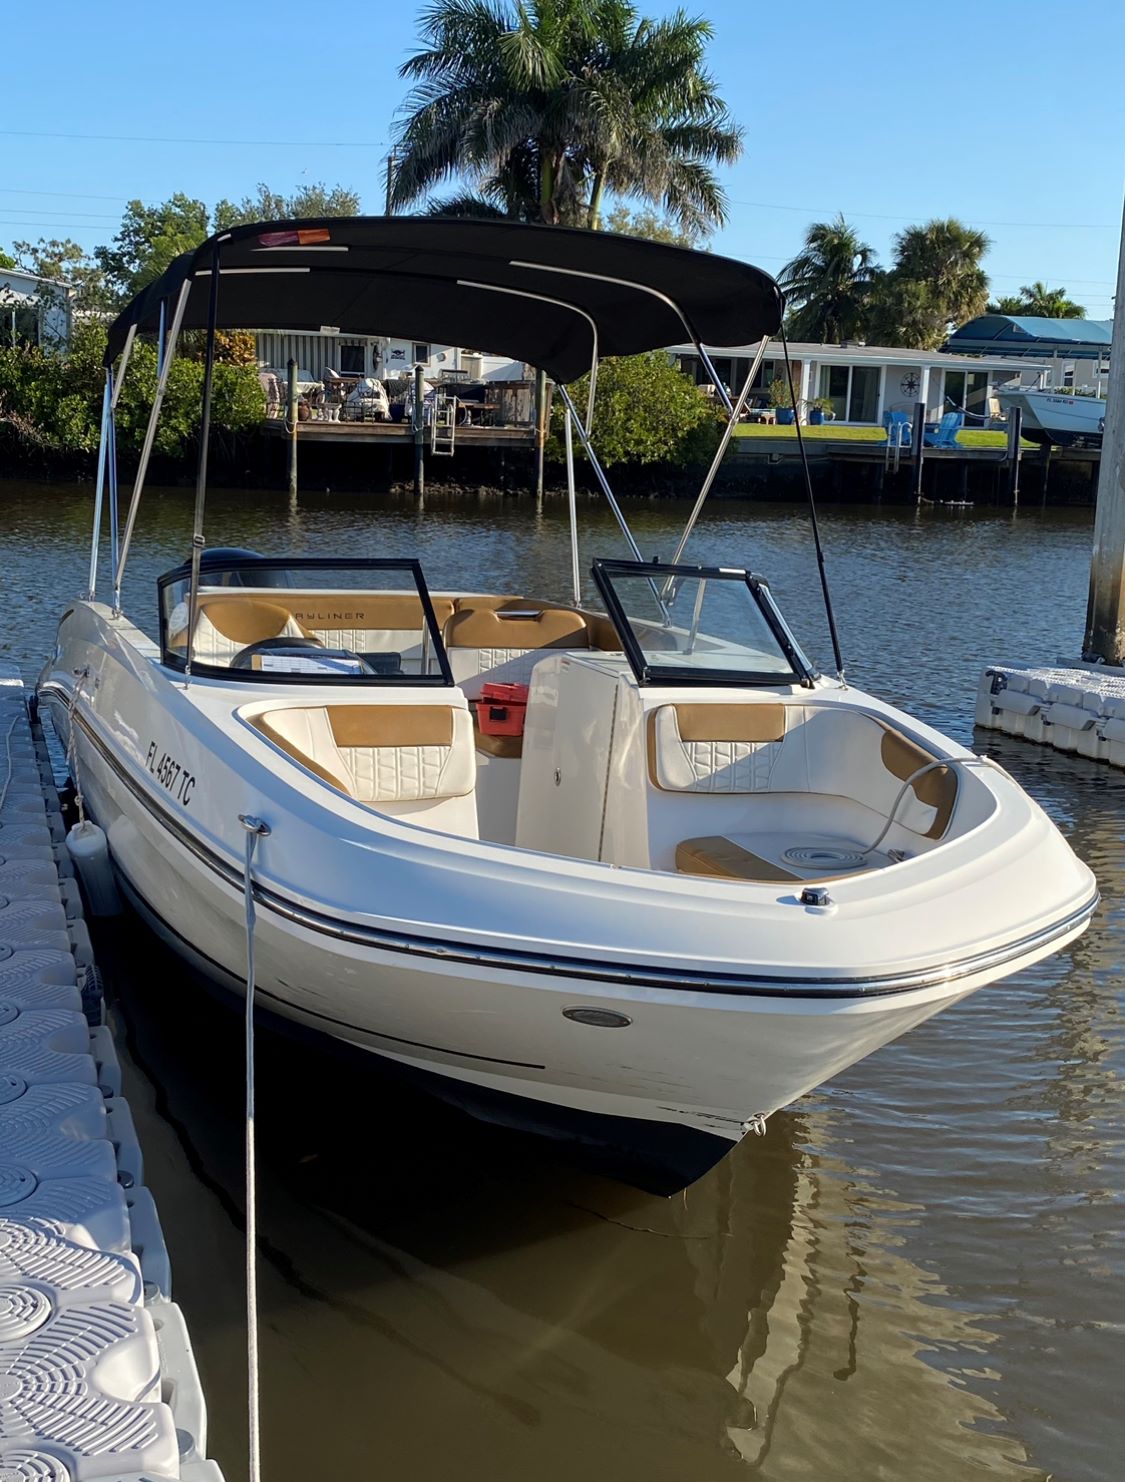 BAIL ME OUT (Bayliner 22' Deck Boat 150 HP - Cruising)